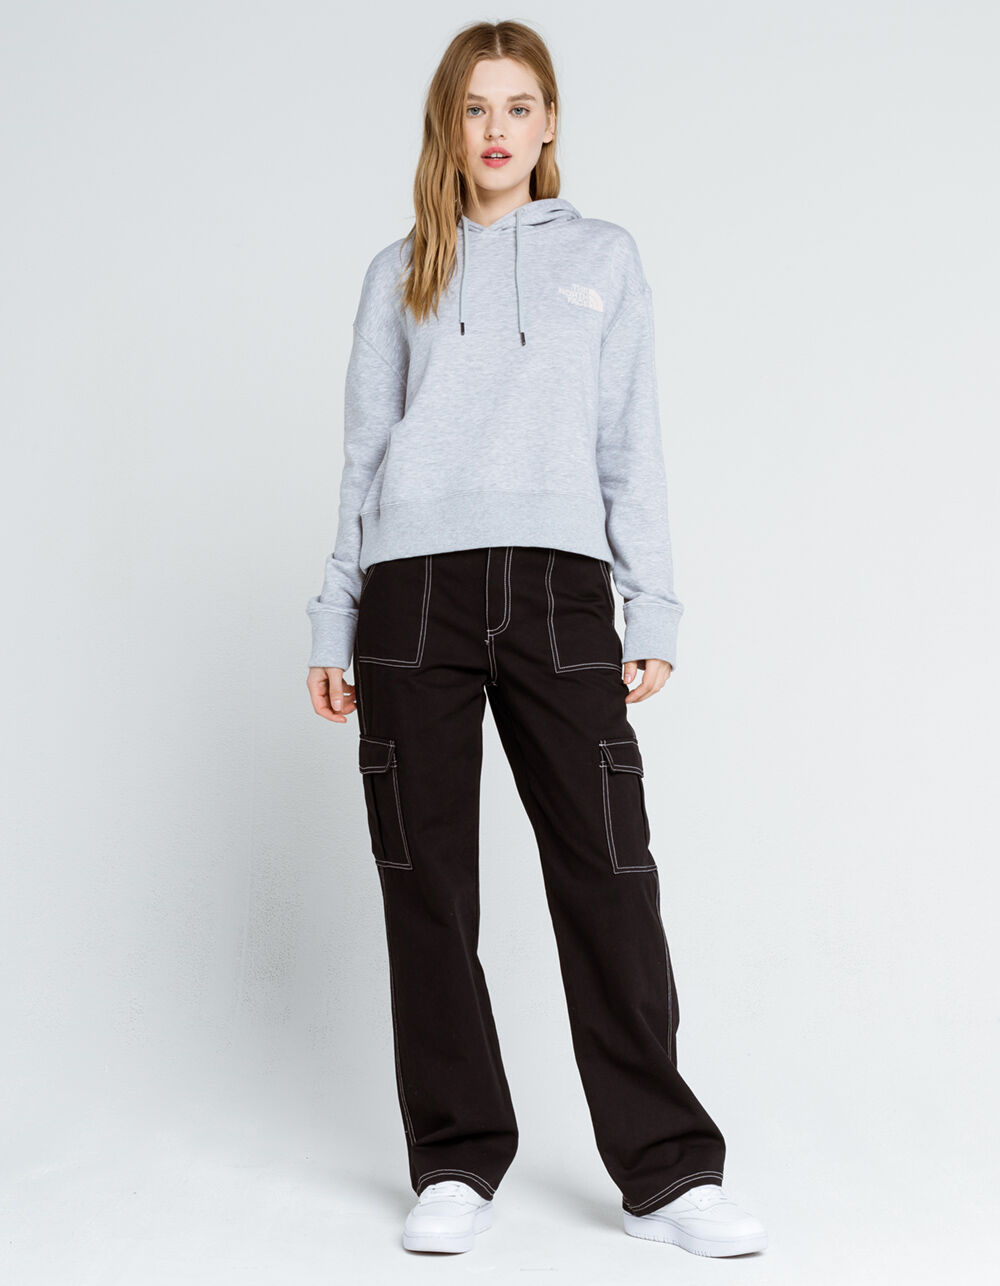 THE NORTH FACE LSE Womens Cropped Hoodie - LIGHT GRAY | Tillys